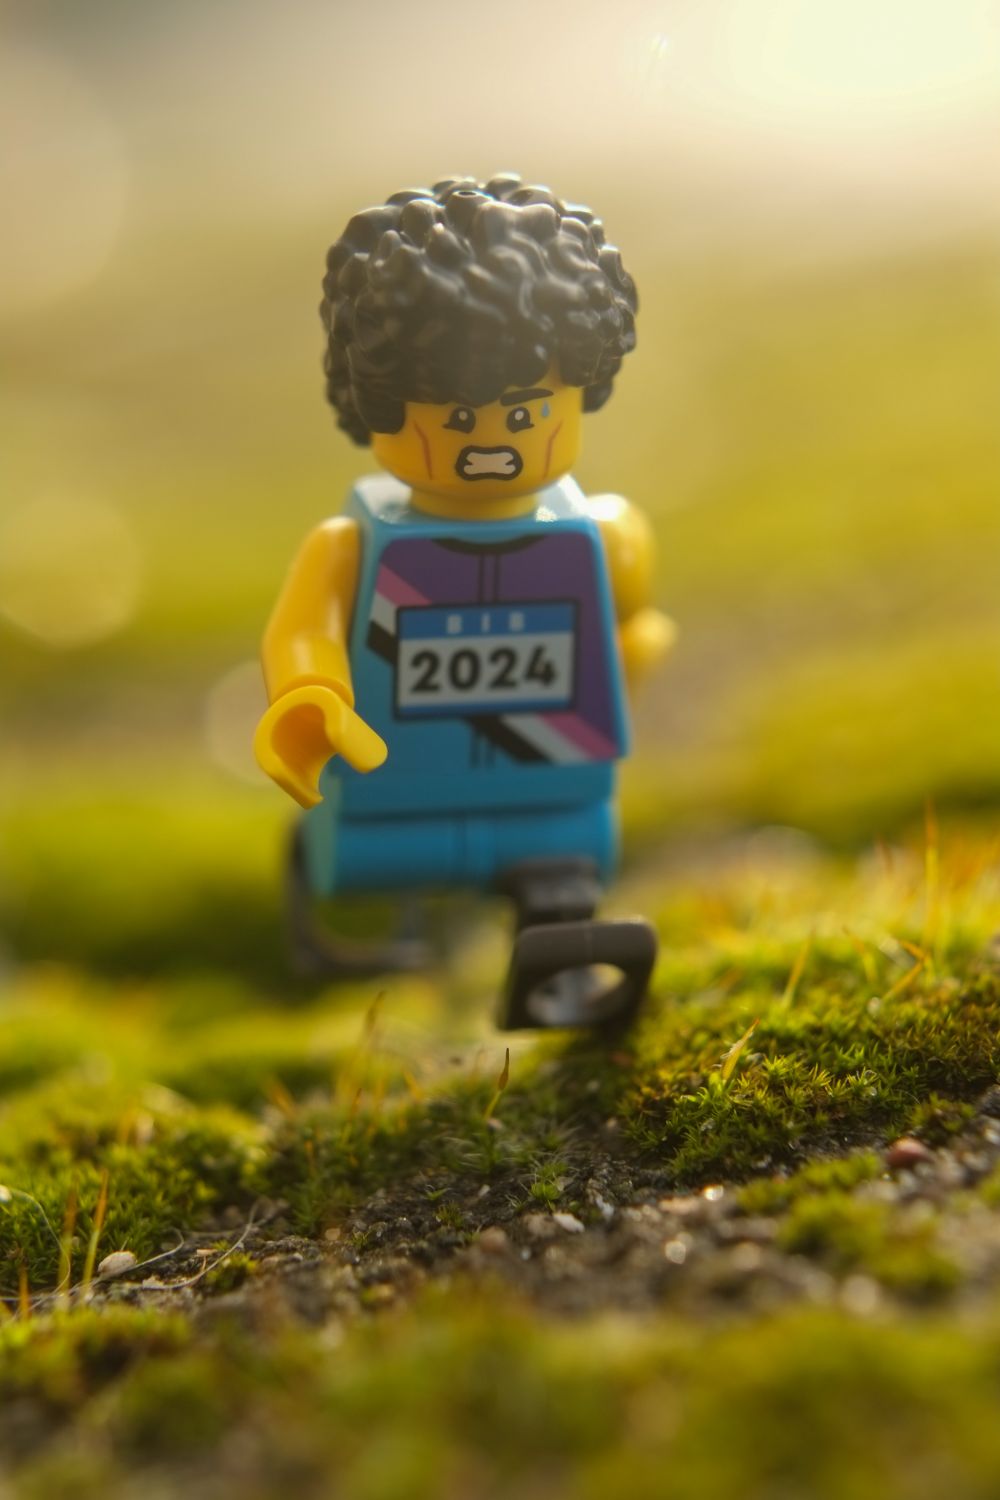 A LEGO paralympic athlete with prosthetic legs running on the grass.